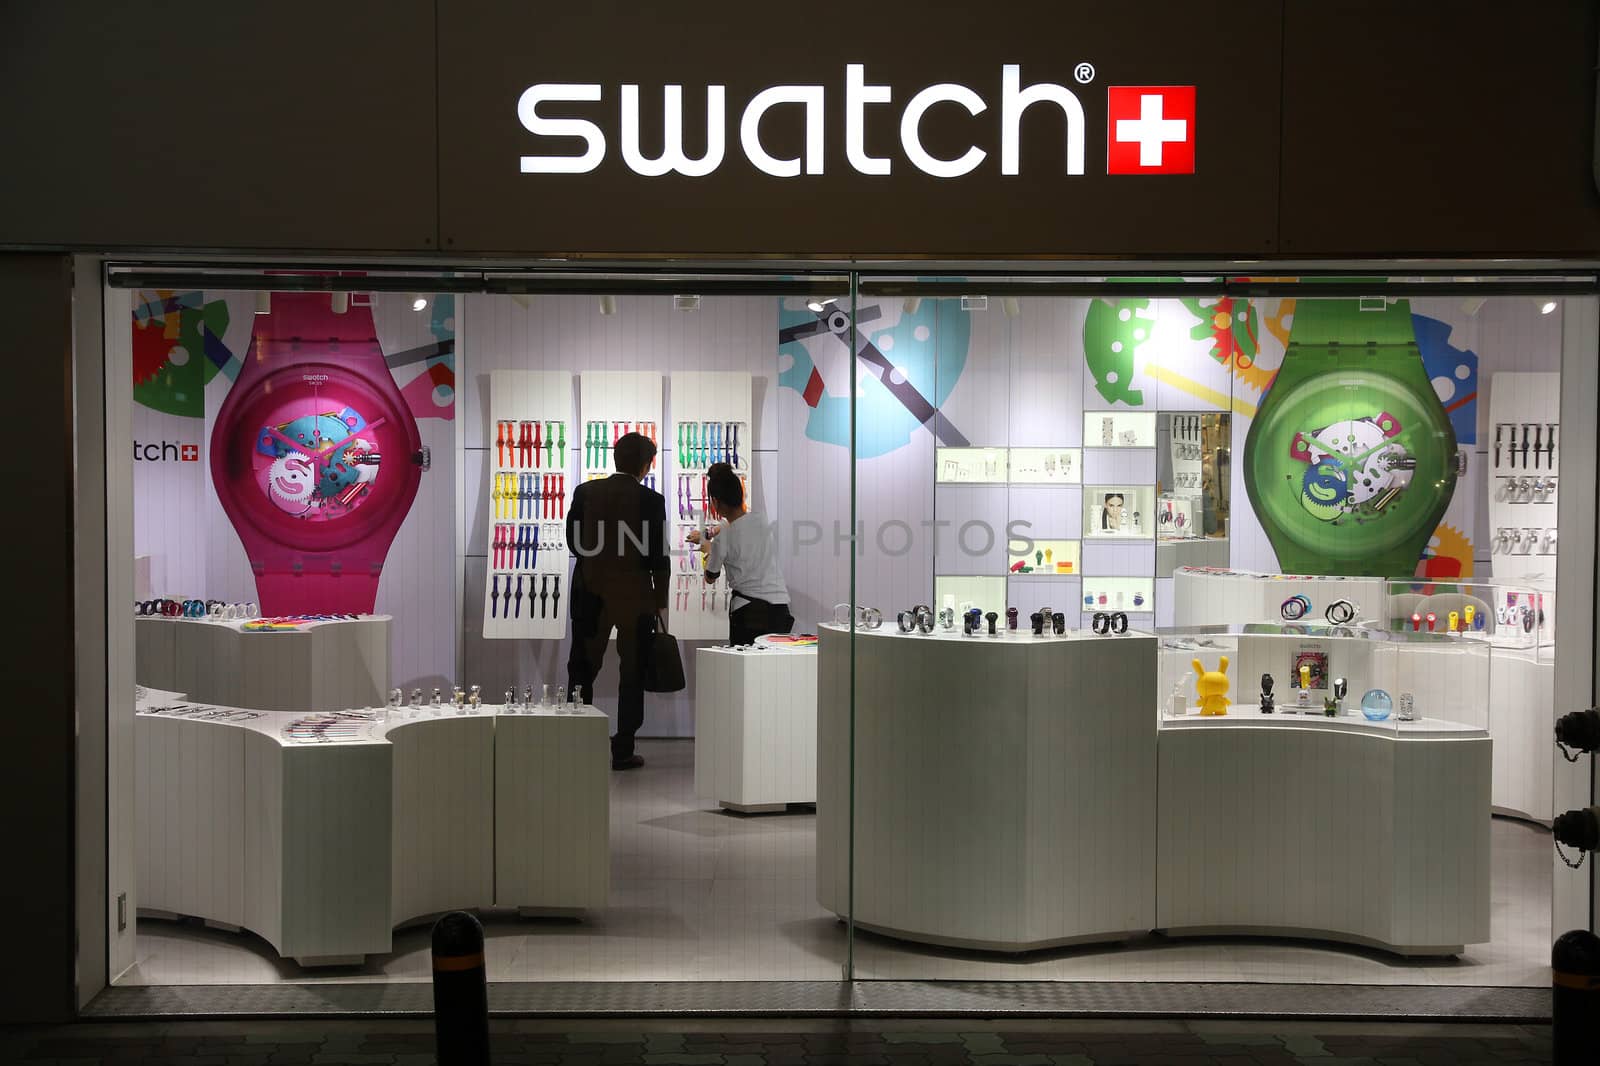 OSAKA, JAPAN - APRIL 24: Swatch store on April 24, 2012 in Osaka, Japan. Swatch group is a profitable watch manufacturer with profit of 1.074 billion CHF (2010). It employs 24,240 people (2010 average).